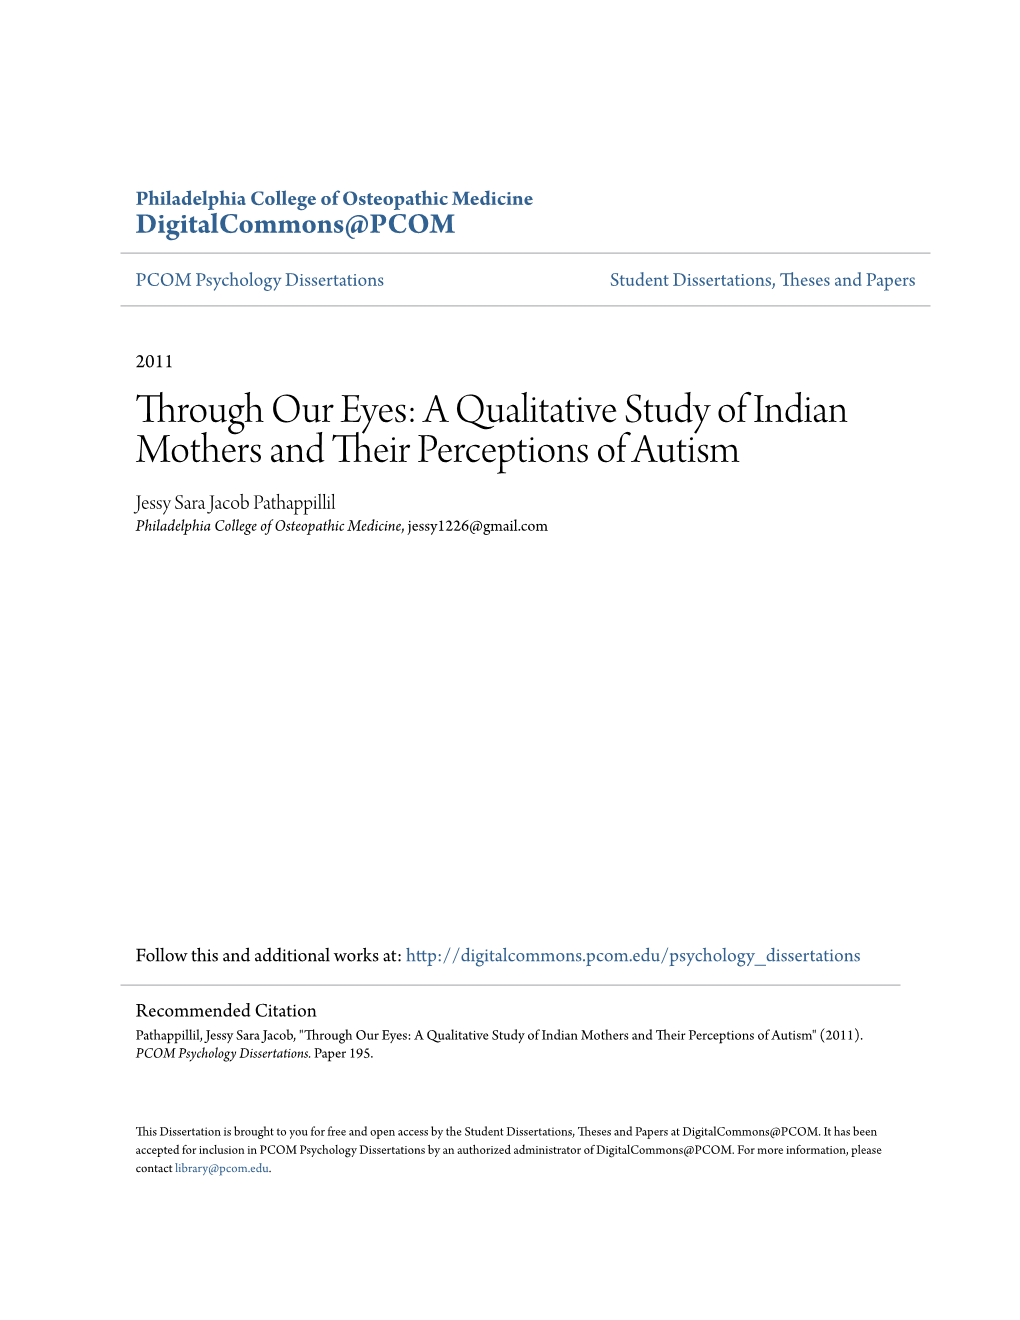 A Qualitative Study of Indian Mothers and Their Perceptions of Autism